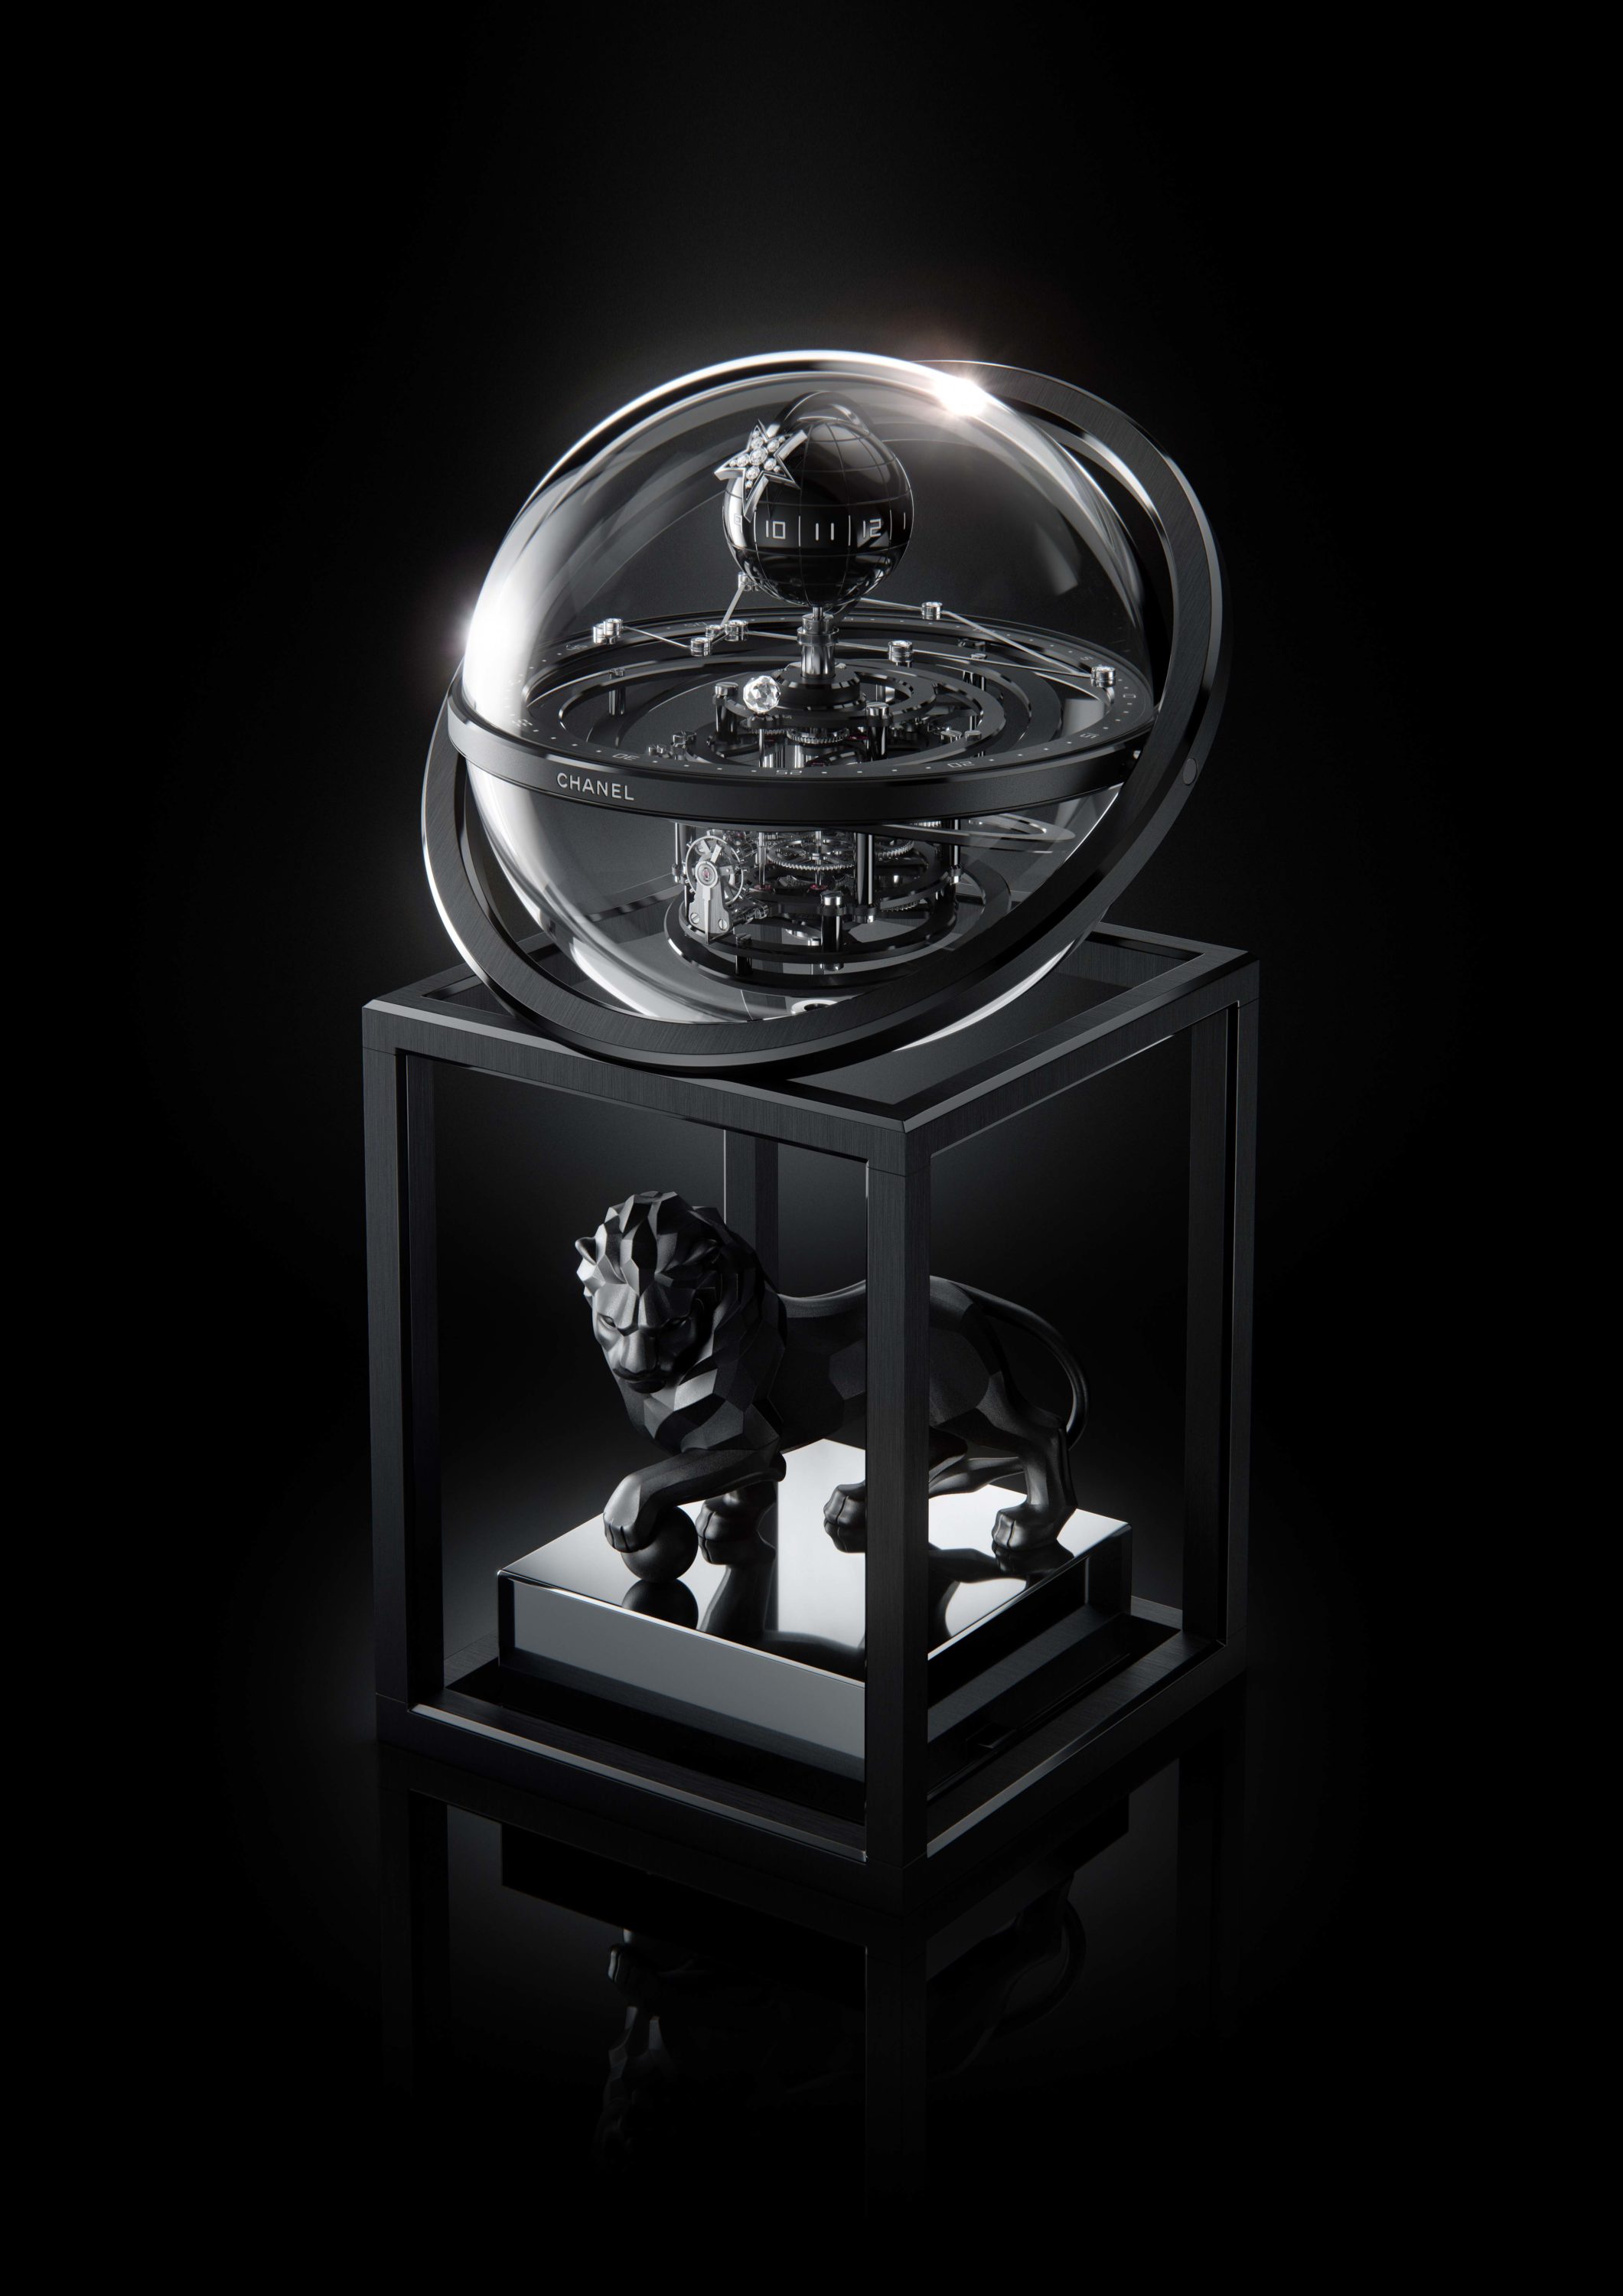 Out of this World: Meet Chanel’s Impressive Lion Astroclock | WatchTime ...